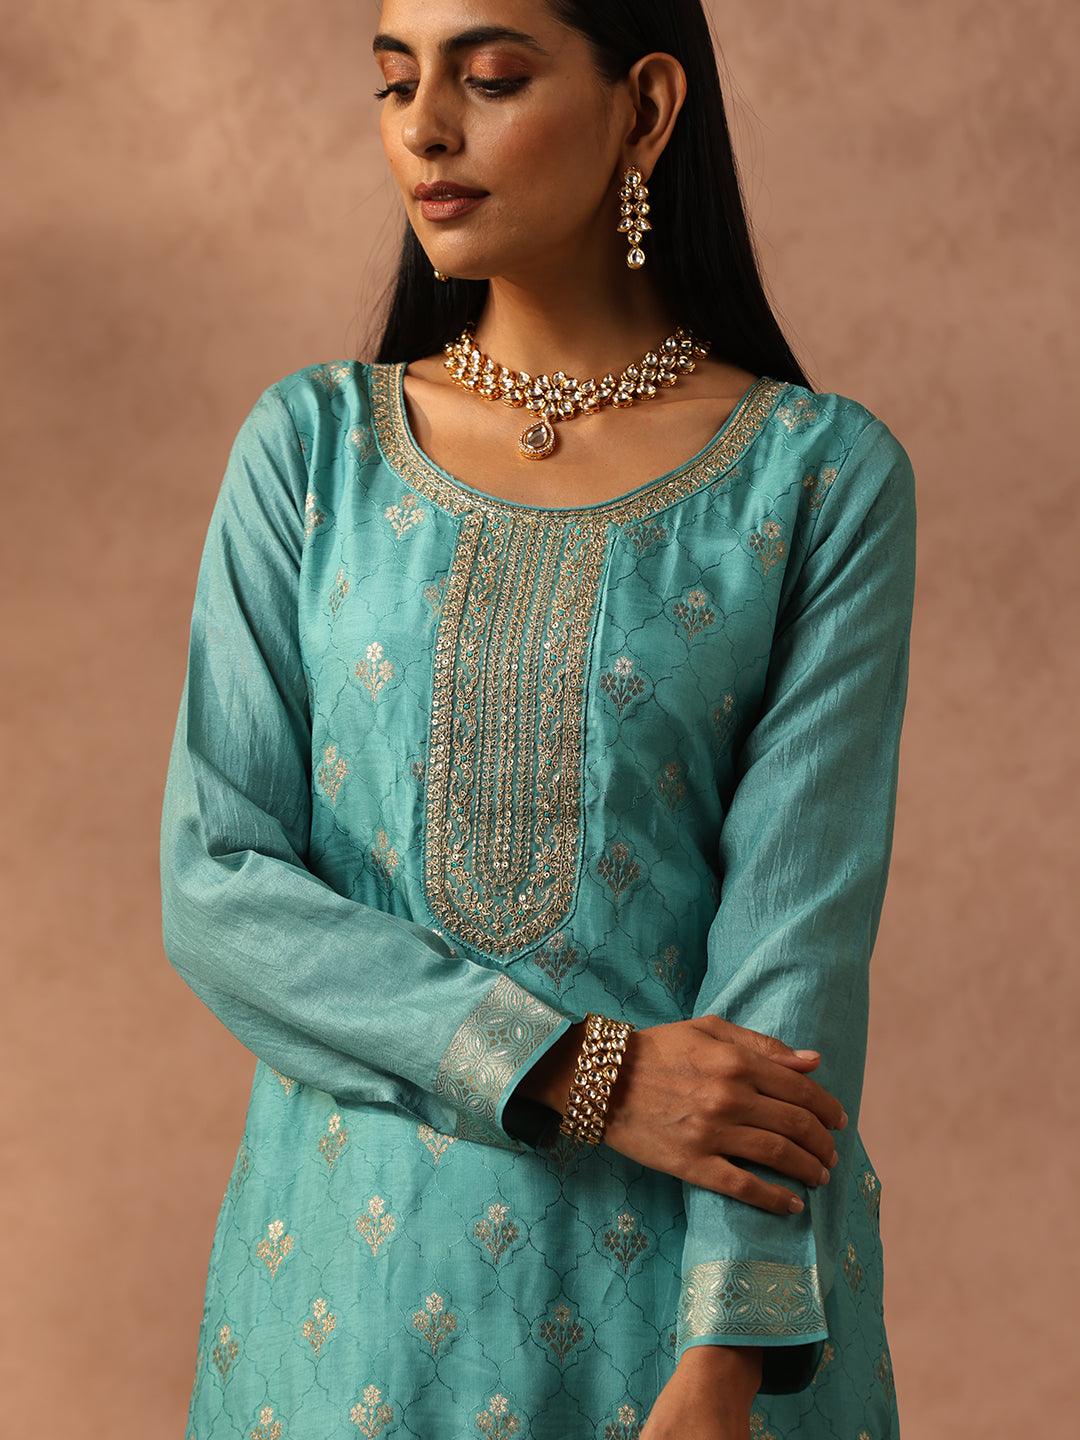 Sea Green Self Design Silk Blend Straight Suit Set With Trousers - Libas